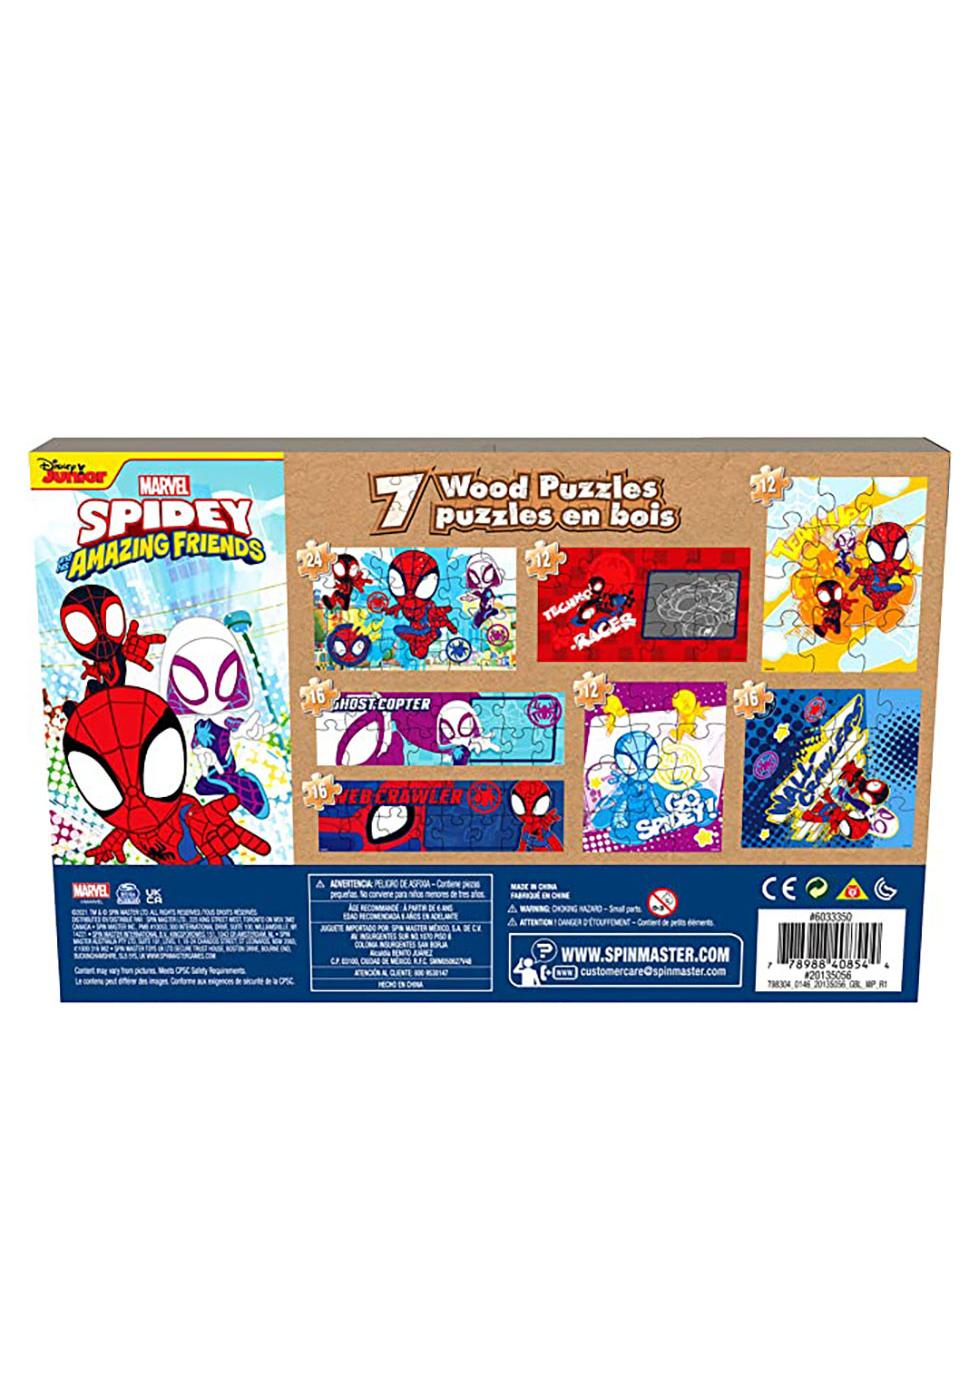 Cardinal Marvel's Spidey and his Amazing Friends Wood Puzzles; image 2 of 2